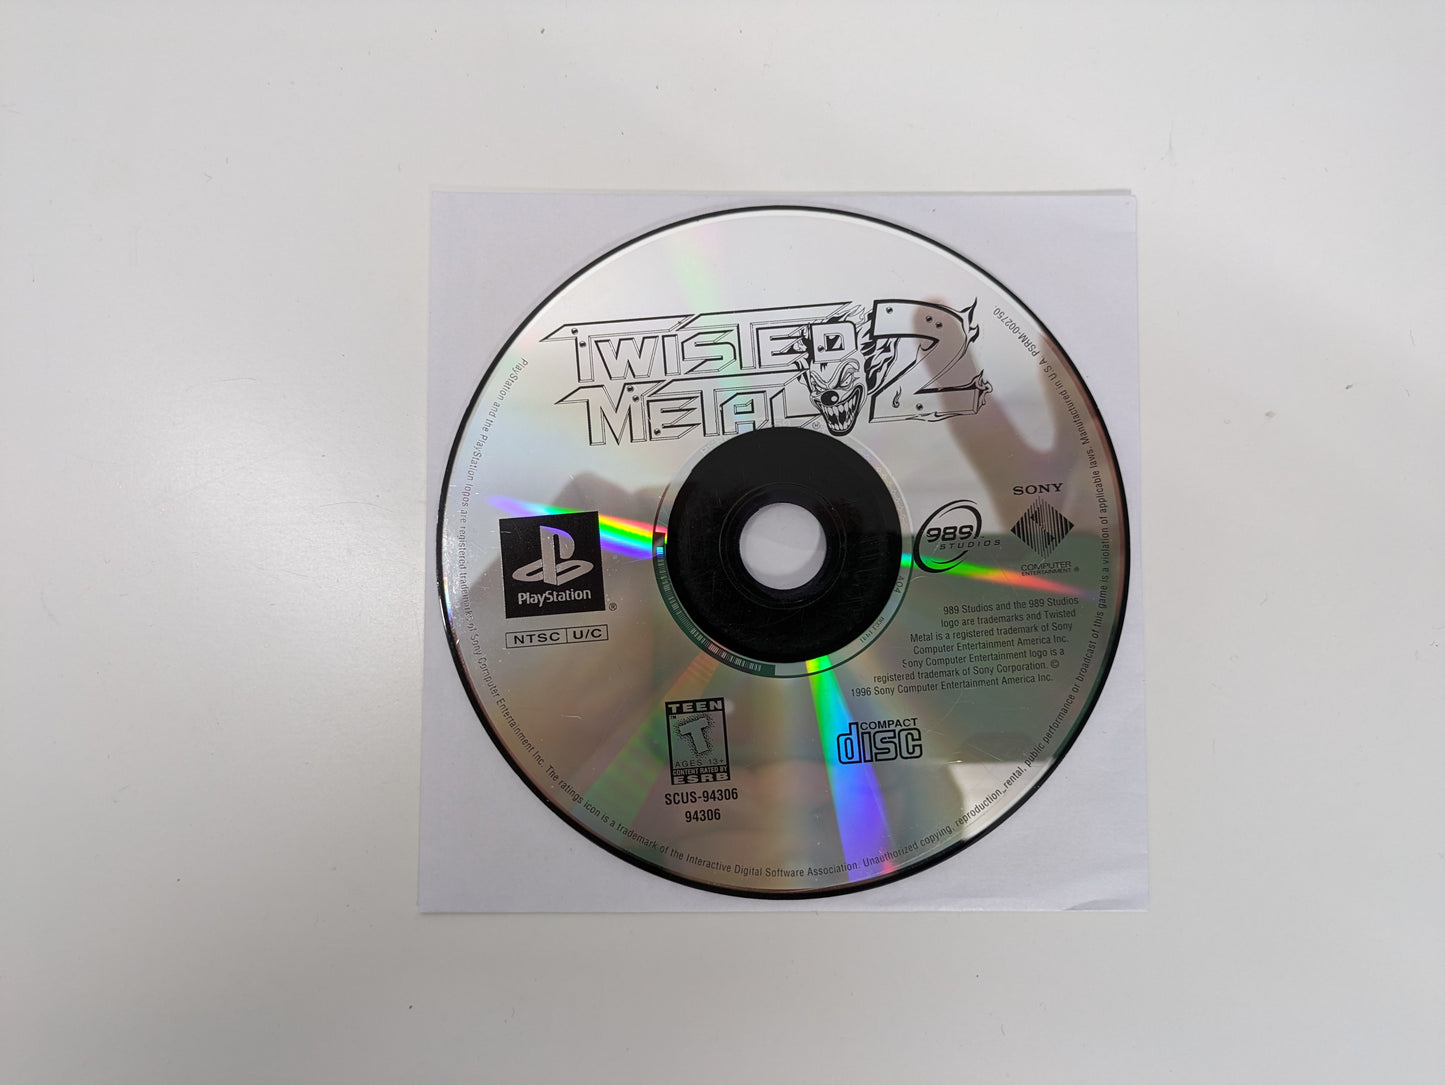 Twisted Metal 2 (PlayStation PS1) Game ONLY - USED